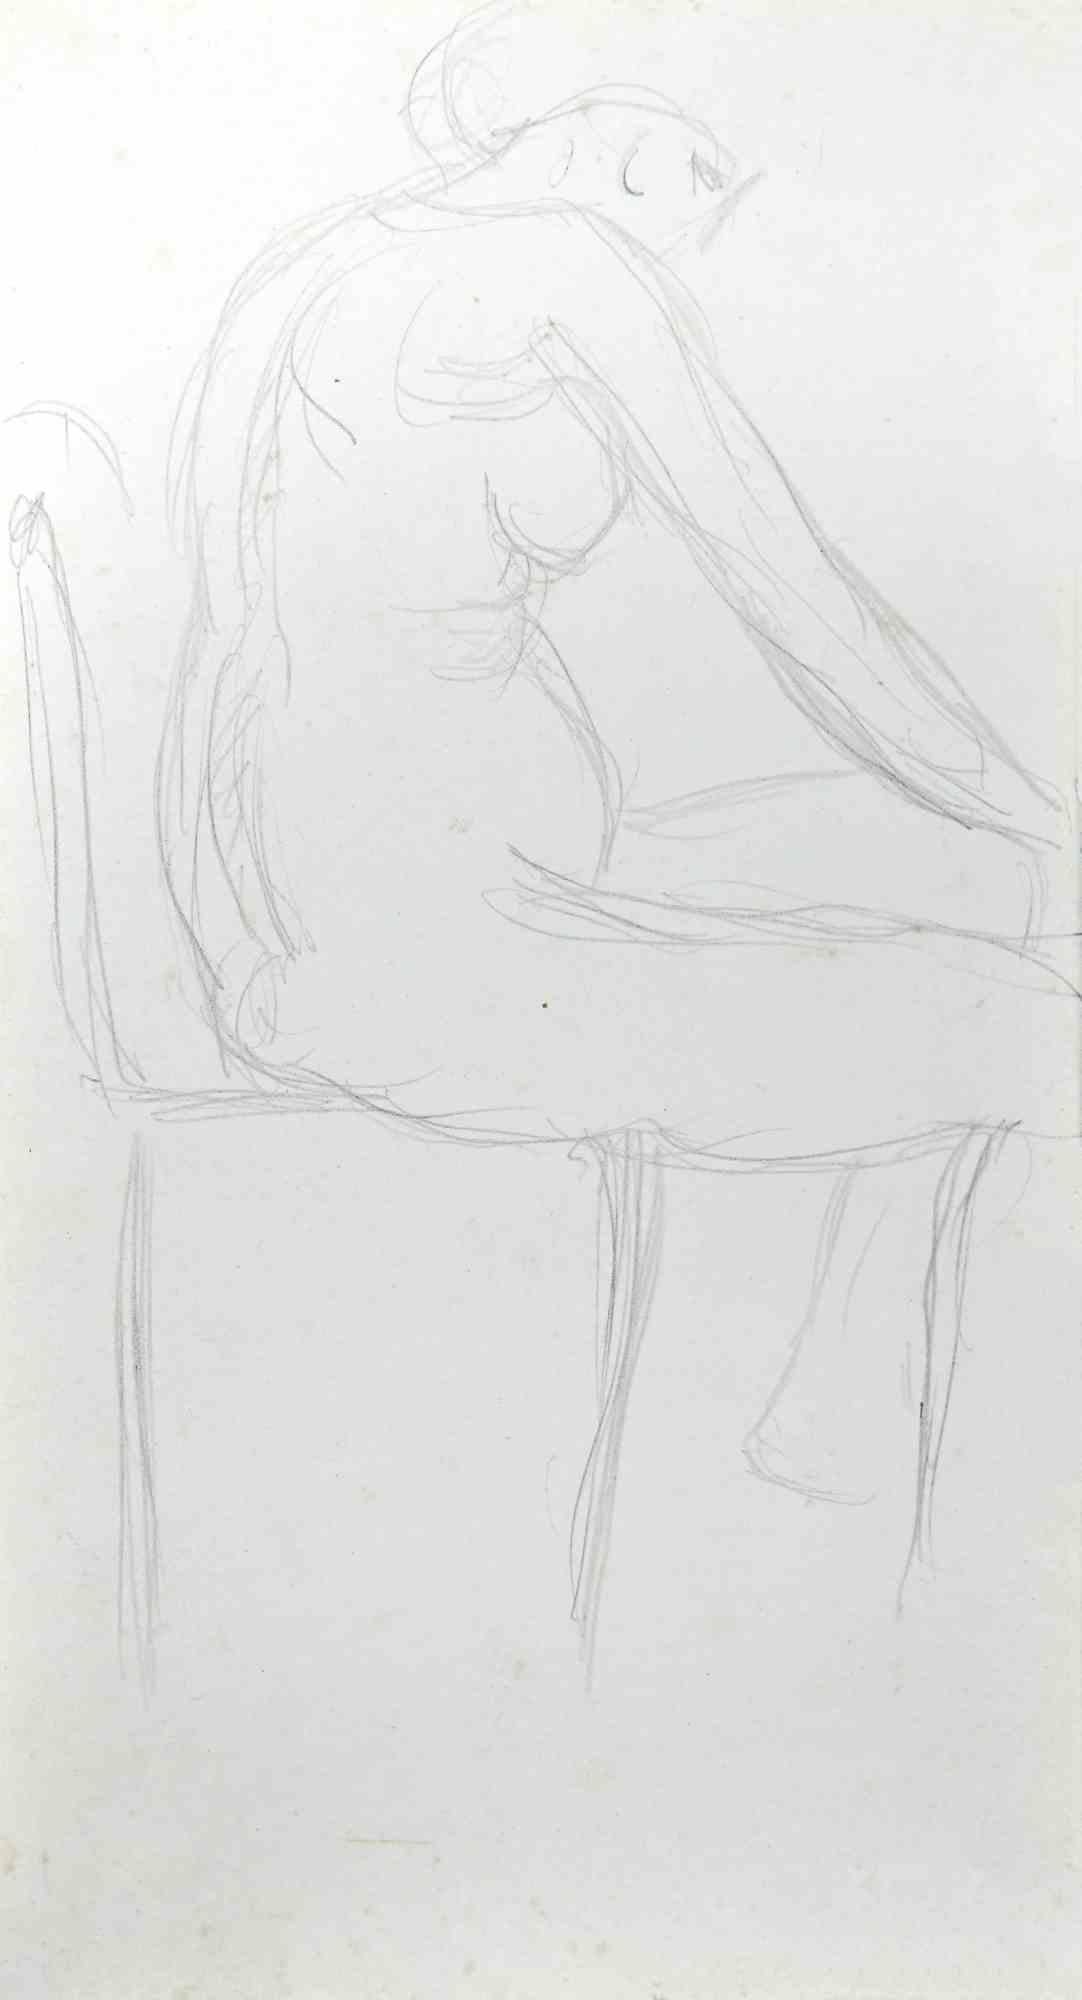 Unknown Figurative Art - The Posing Nude - Pencil Drawing - Early 20th Century